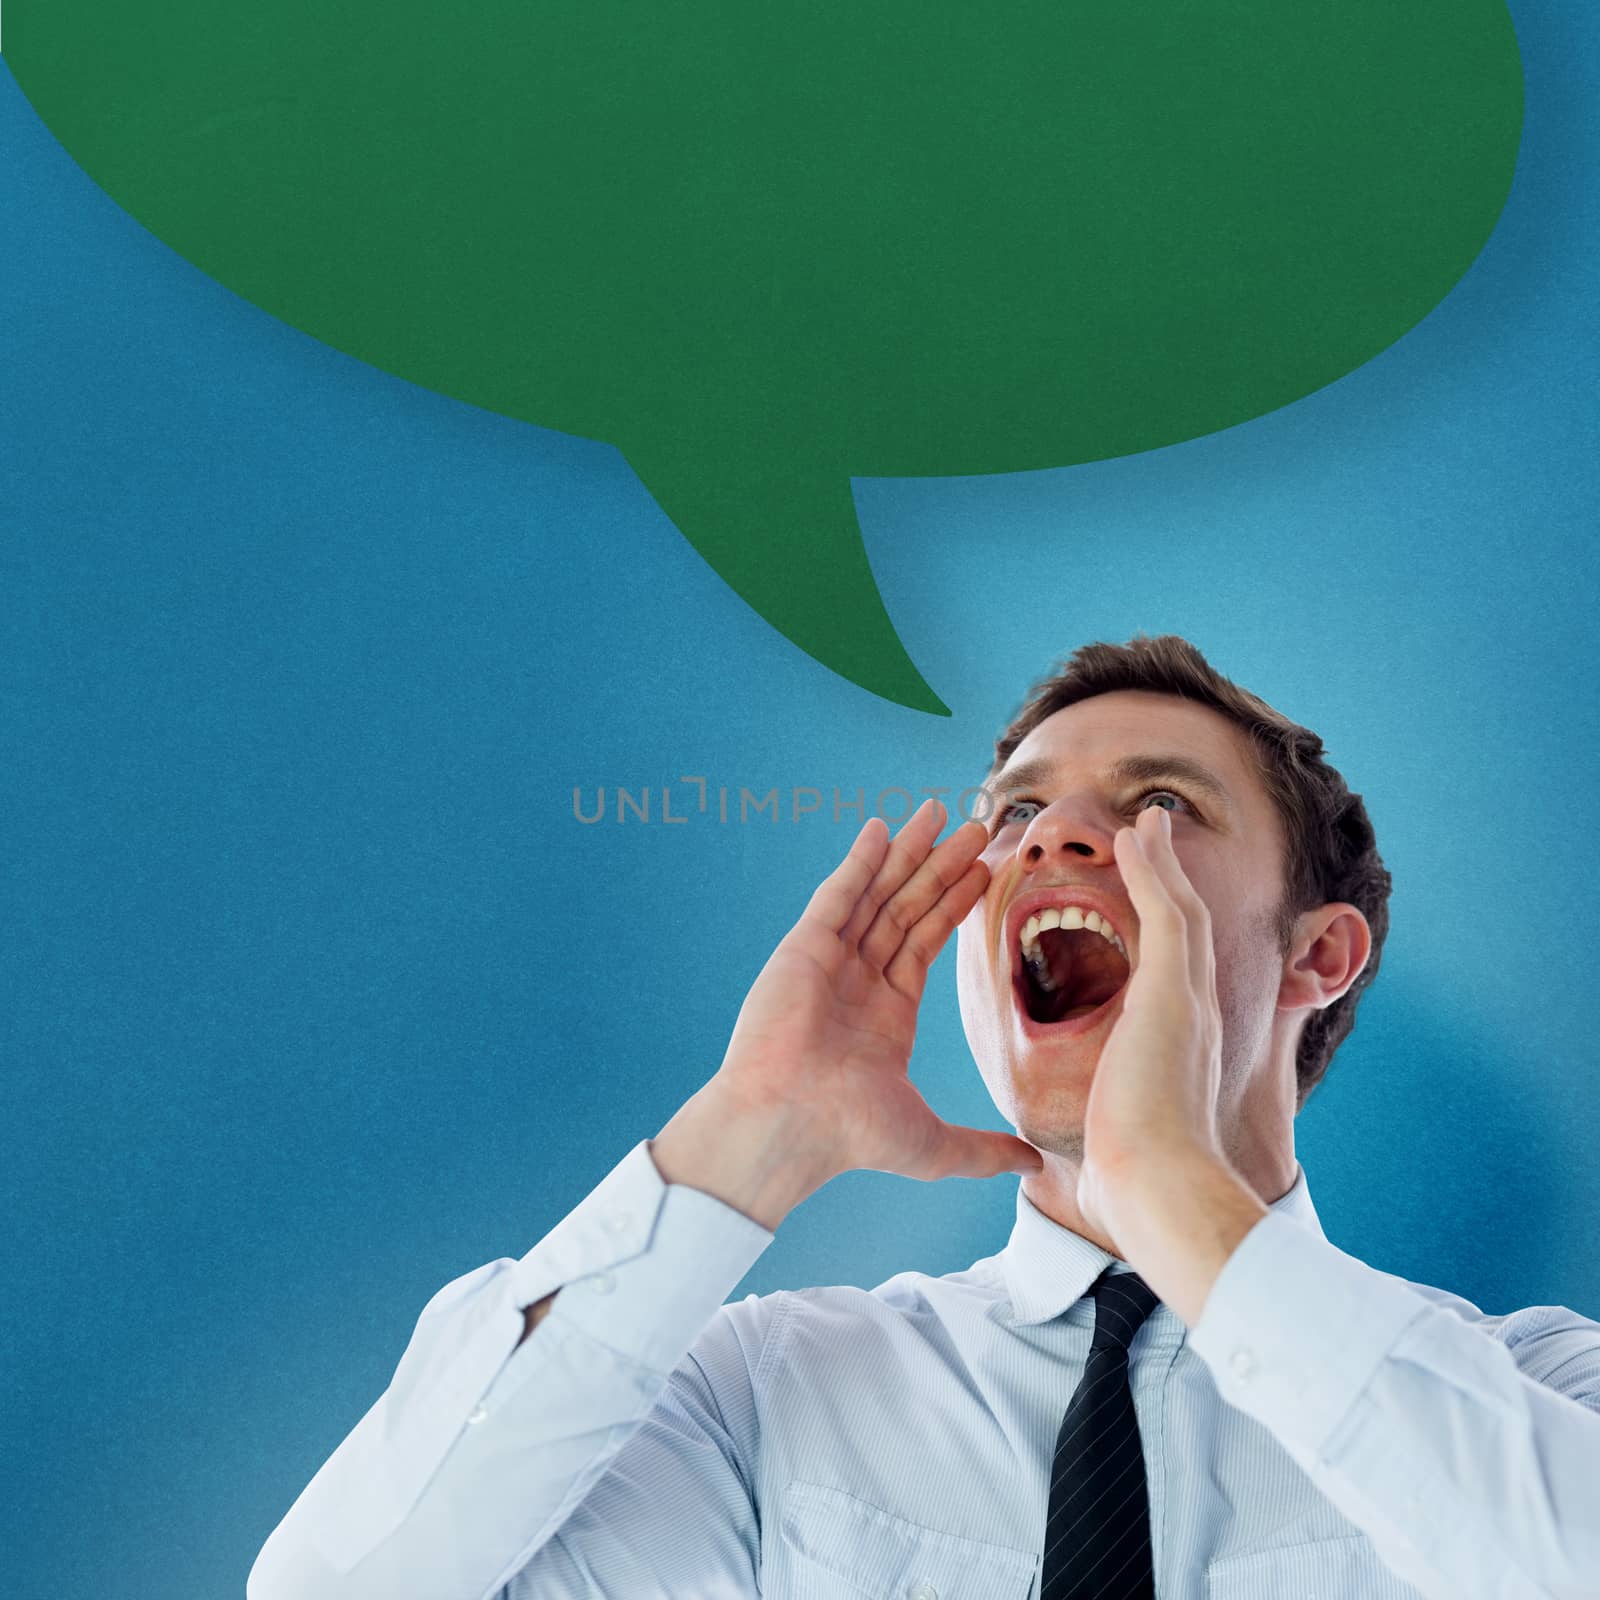 Composite image of businessman shouting with speech bubble by Wavebreakmedia